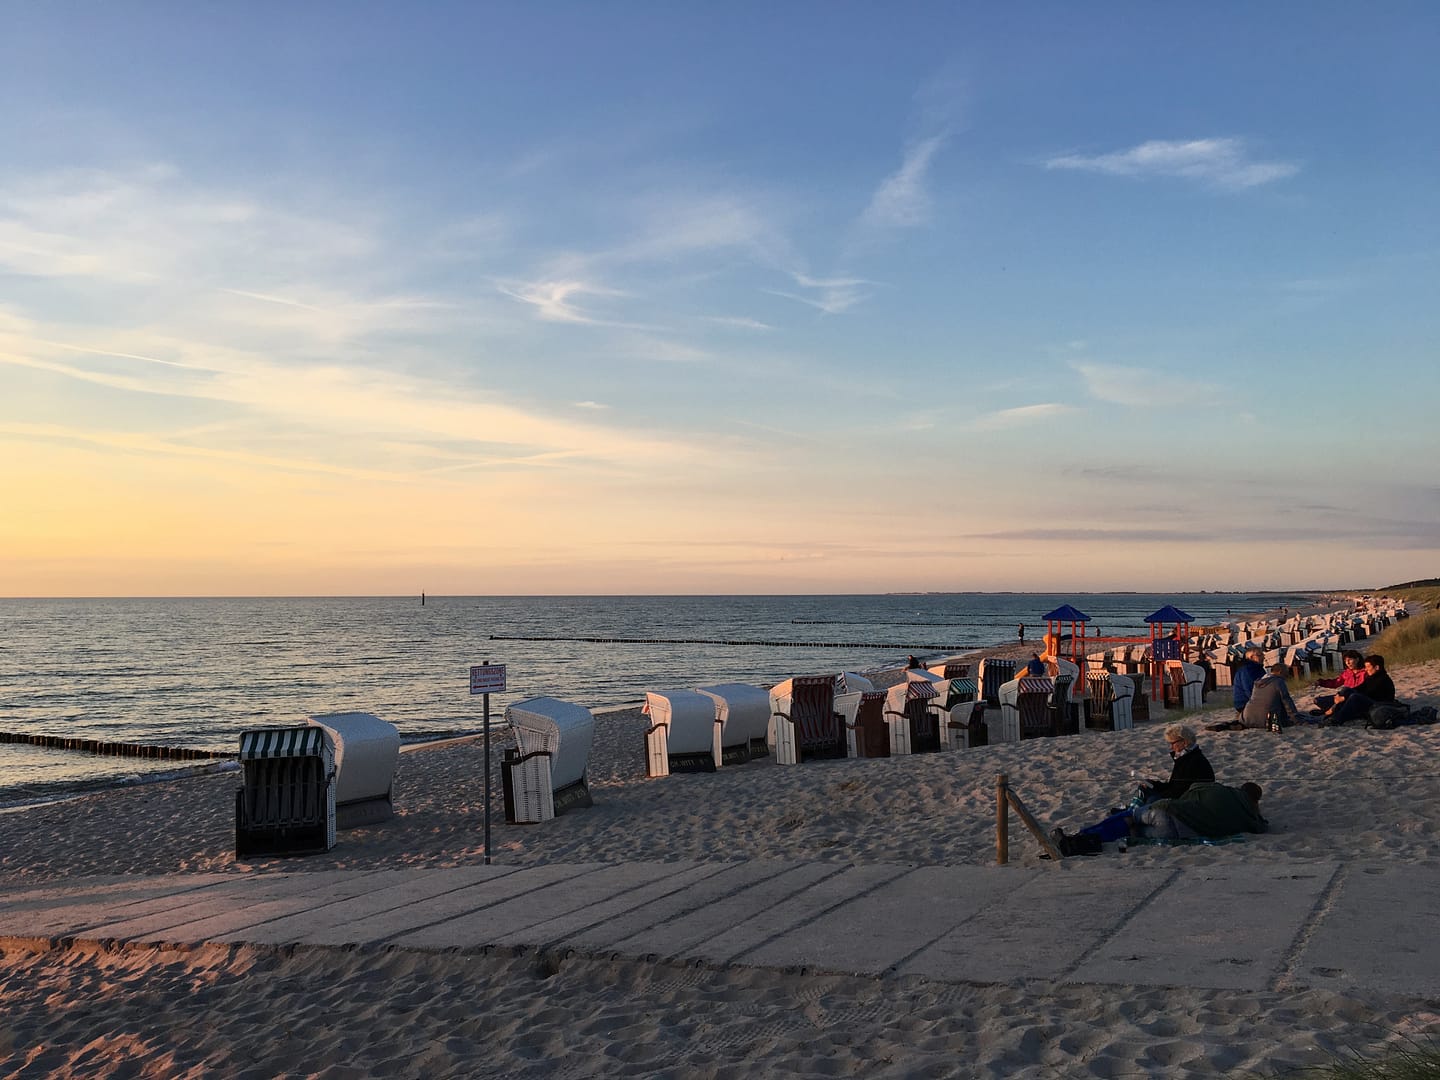 Evening view of Dier Hagen beach one of the 8 Reasons Why We Holiday At The Baltic Sea